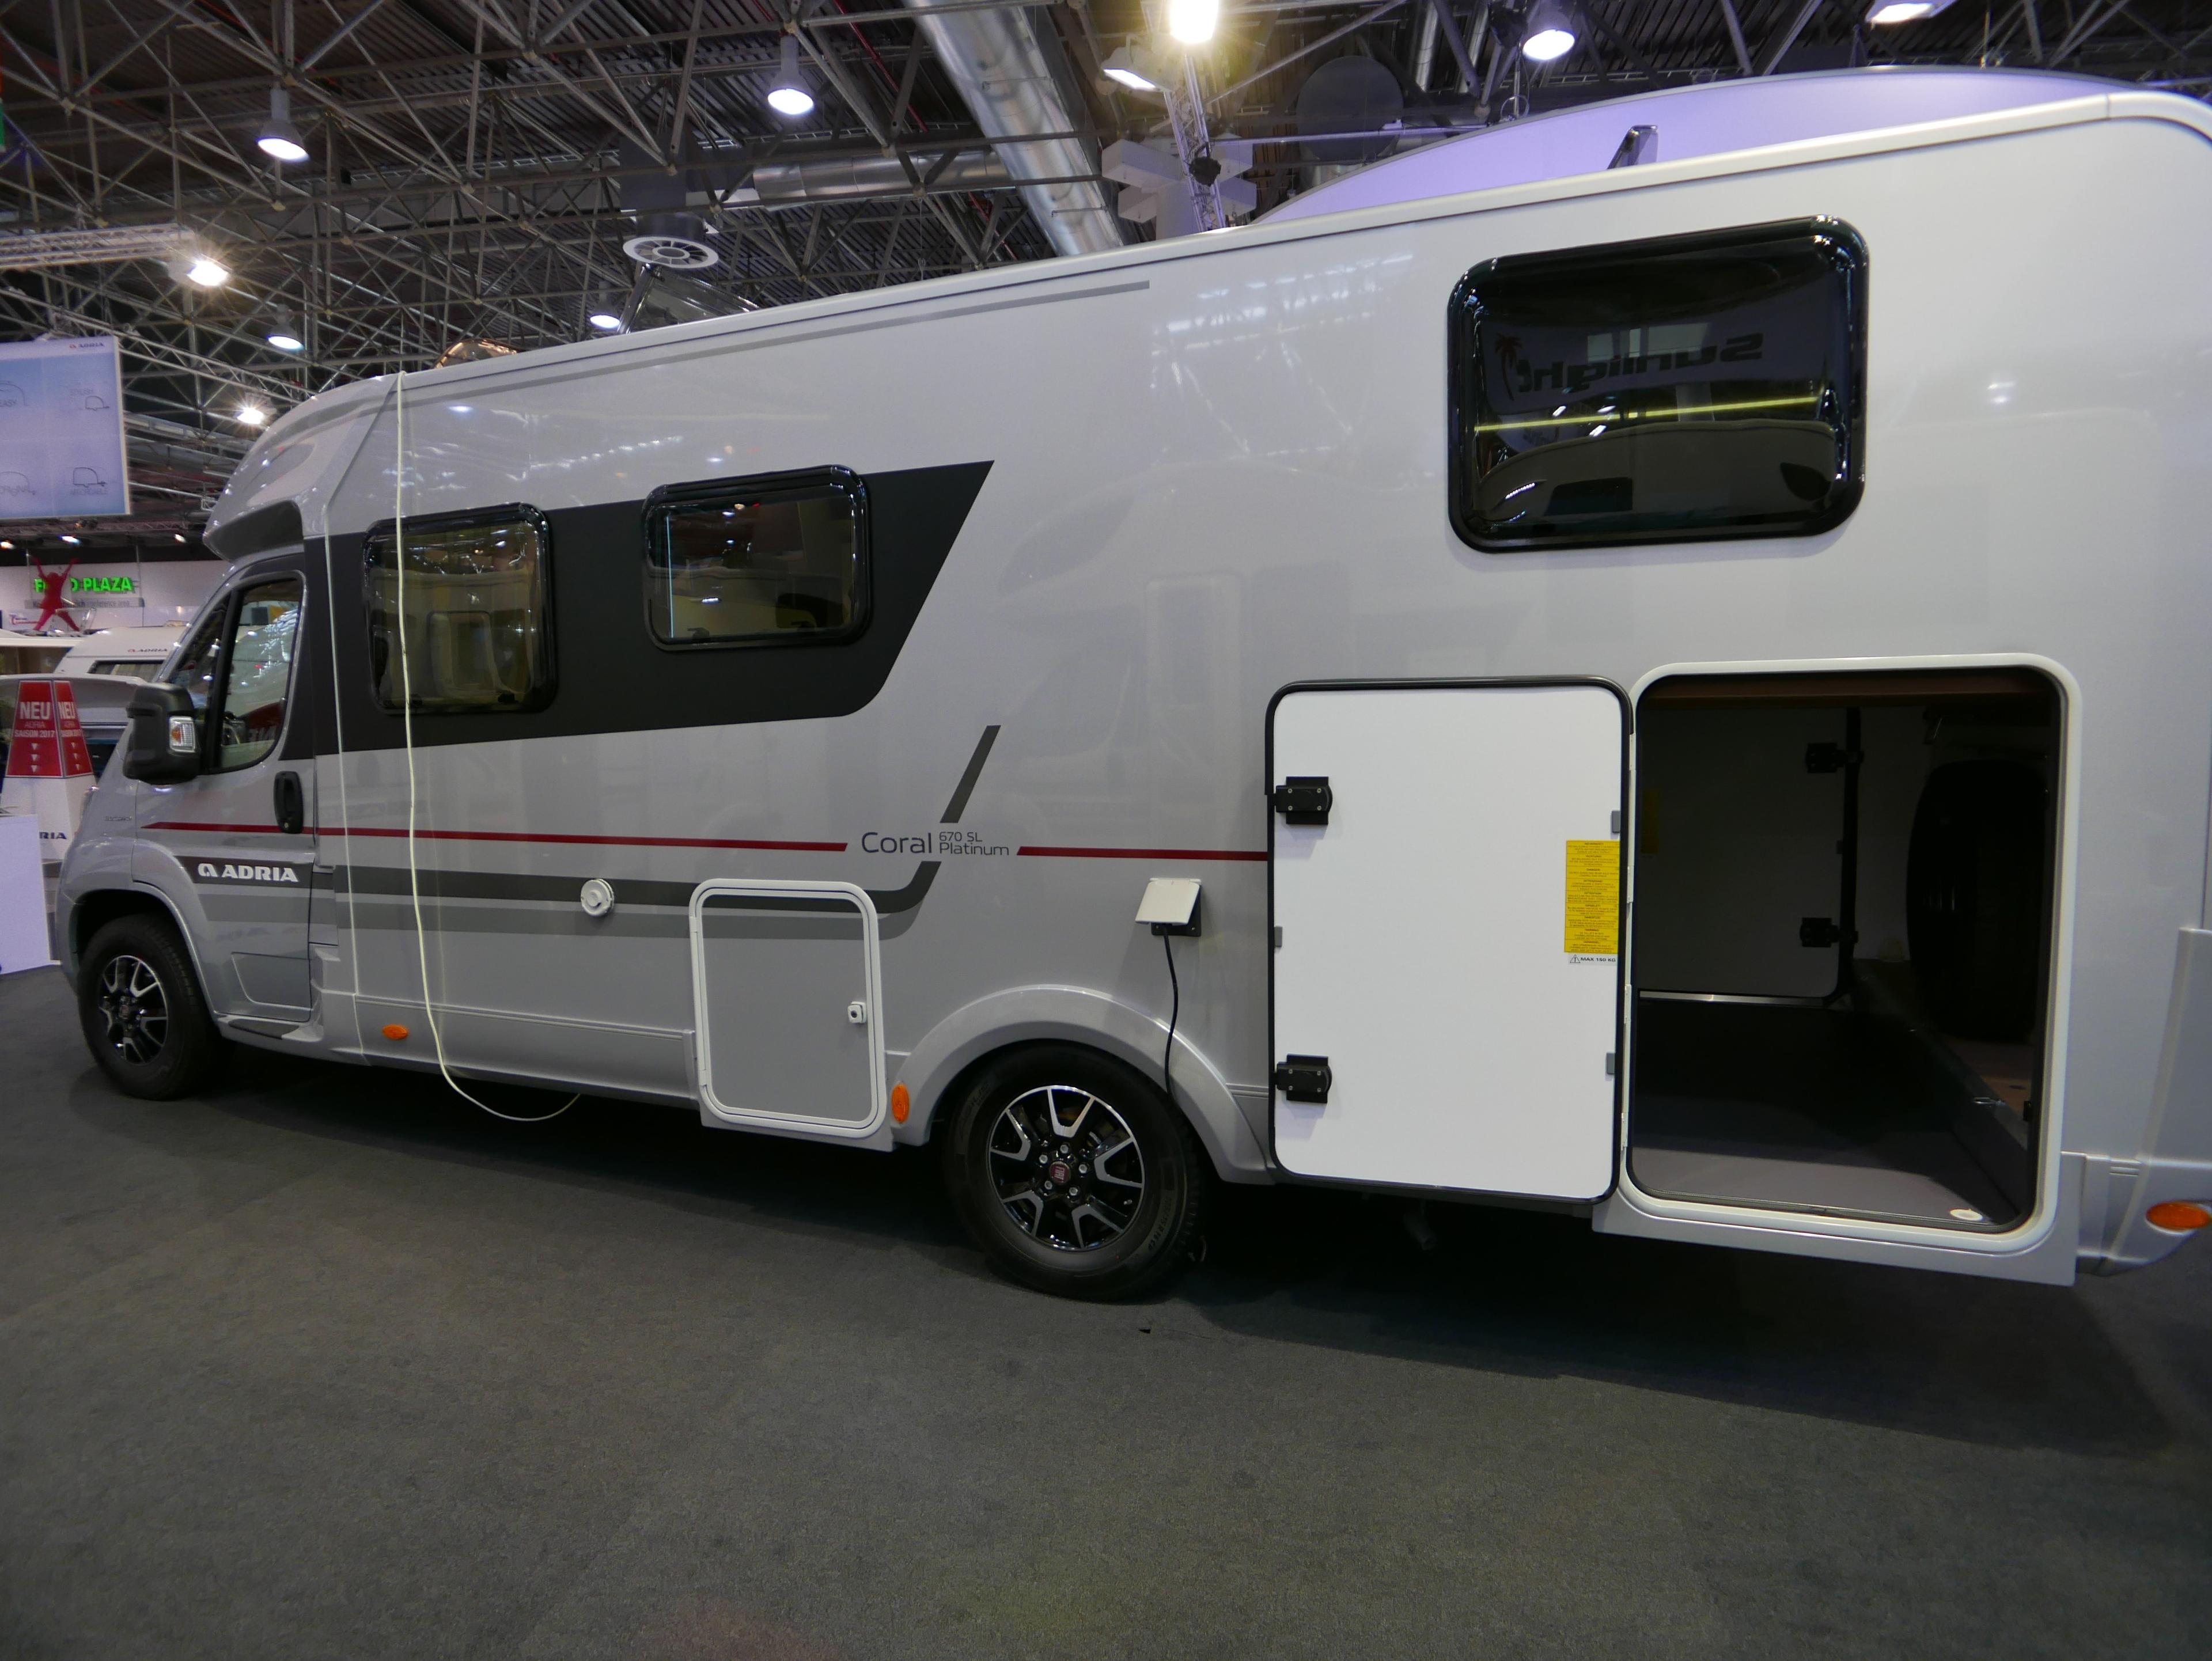 Adria - new motorhomes with small engines – image 4